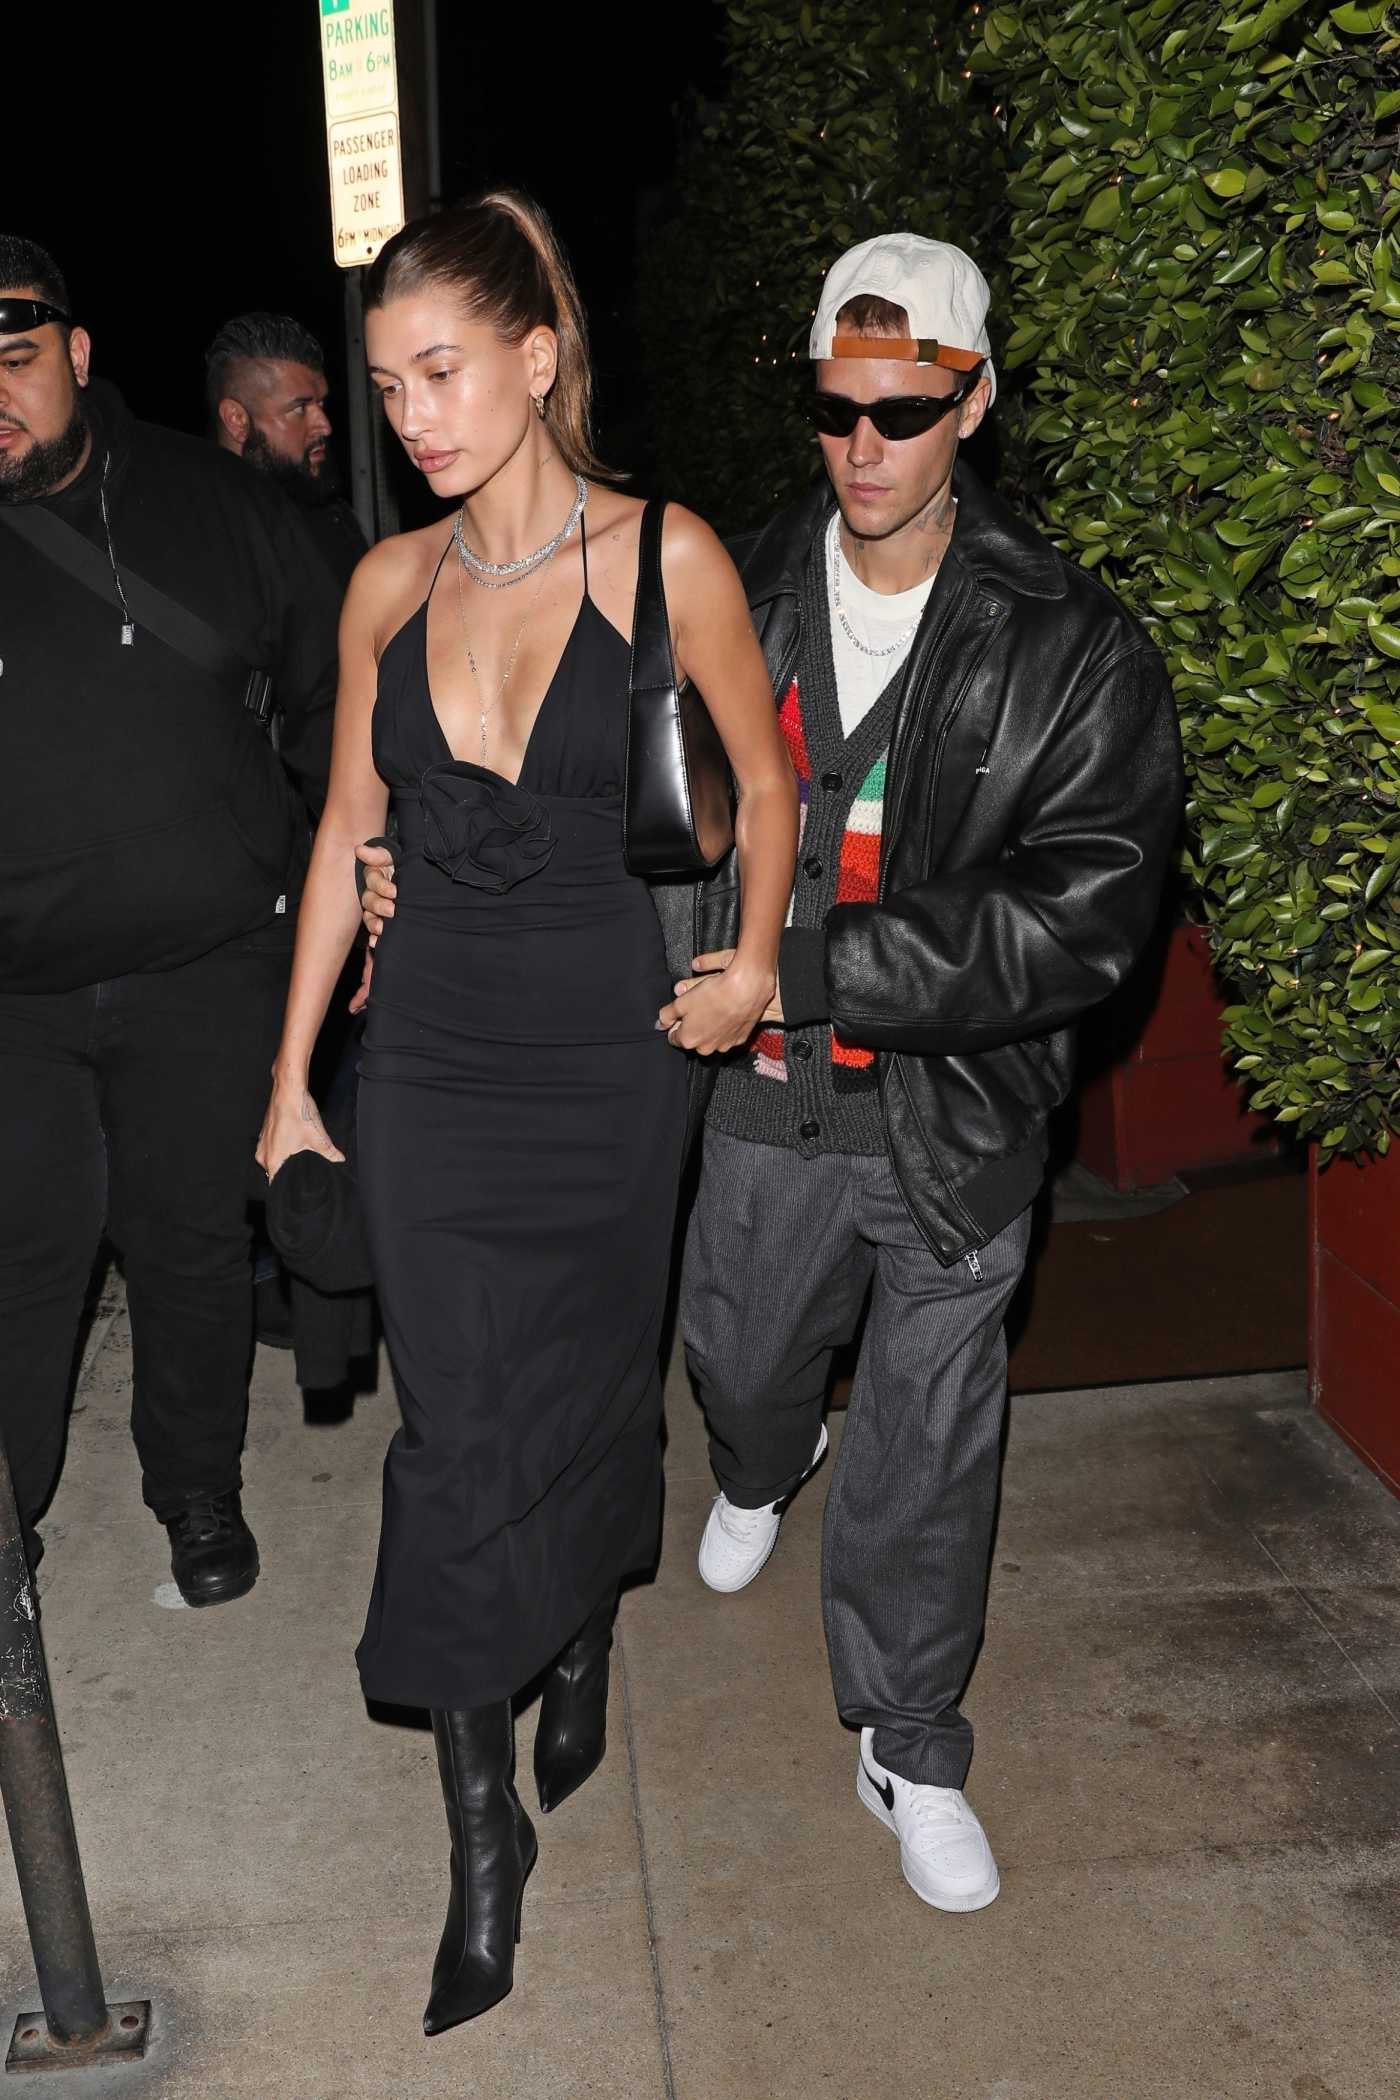 Hailey Baldwin in a Black Dress Leaves After Dinner at Giorgio Baldi with Justin Bieber in Santa Monica 03/20/2022